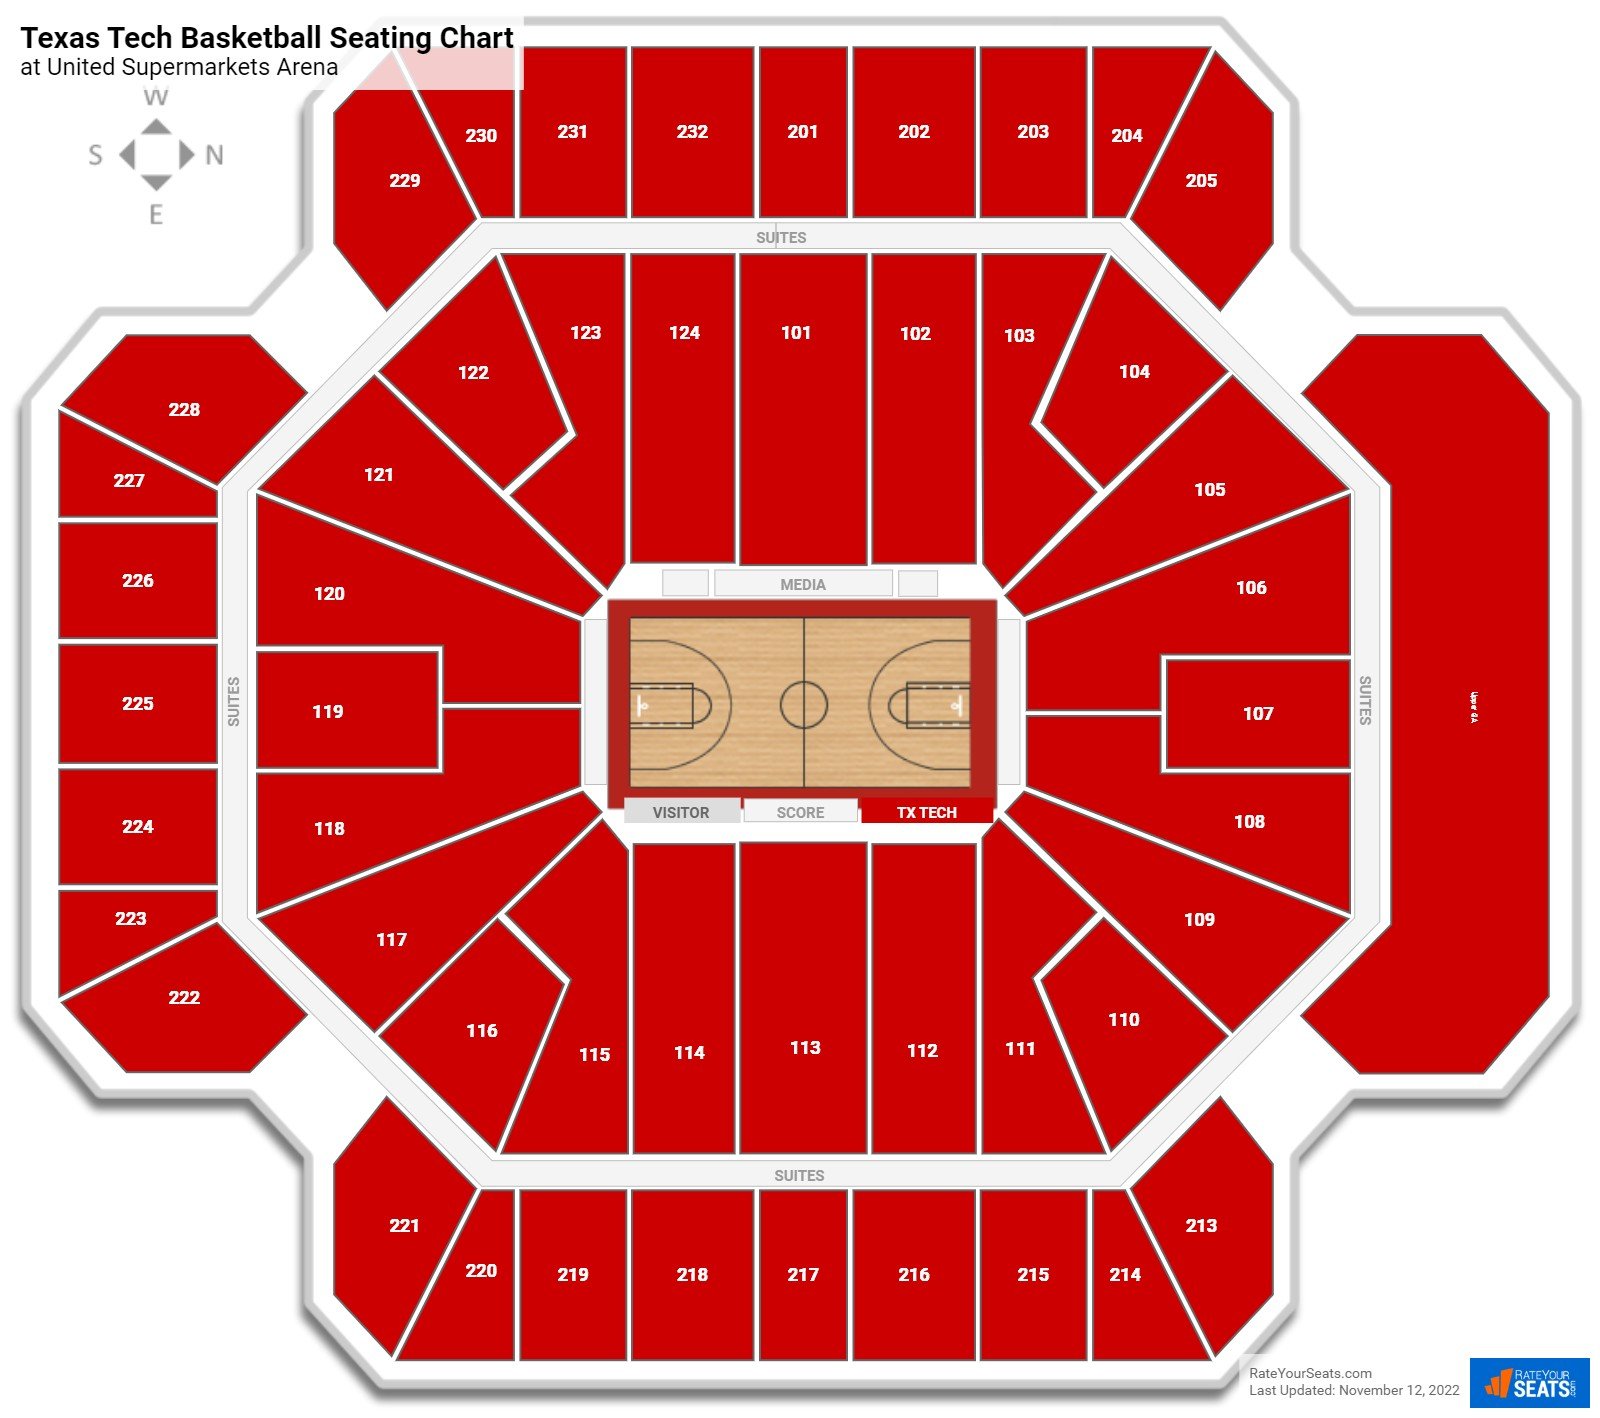 Texas Tech Red Raiders Seating Chart at United Supermarkets Arena